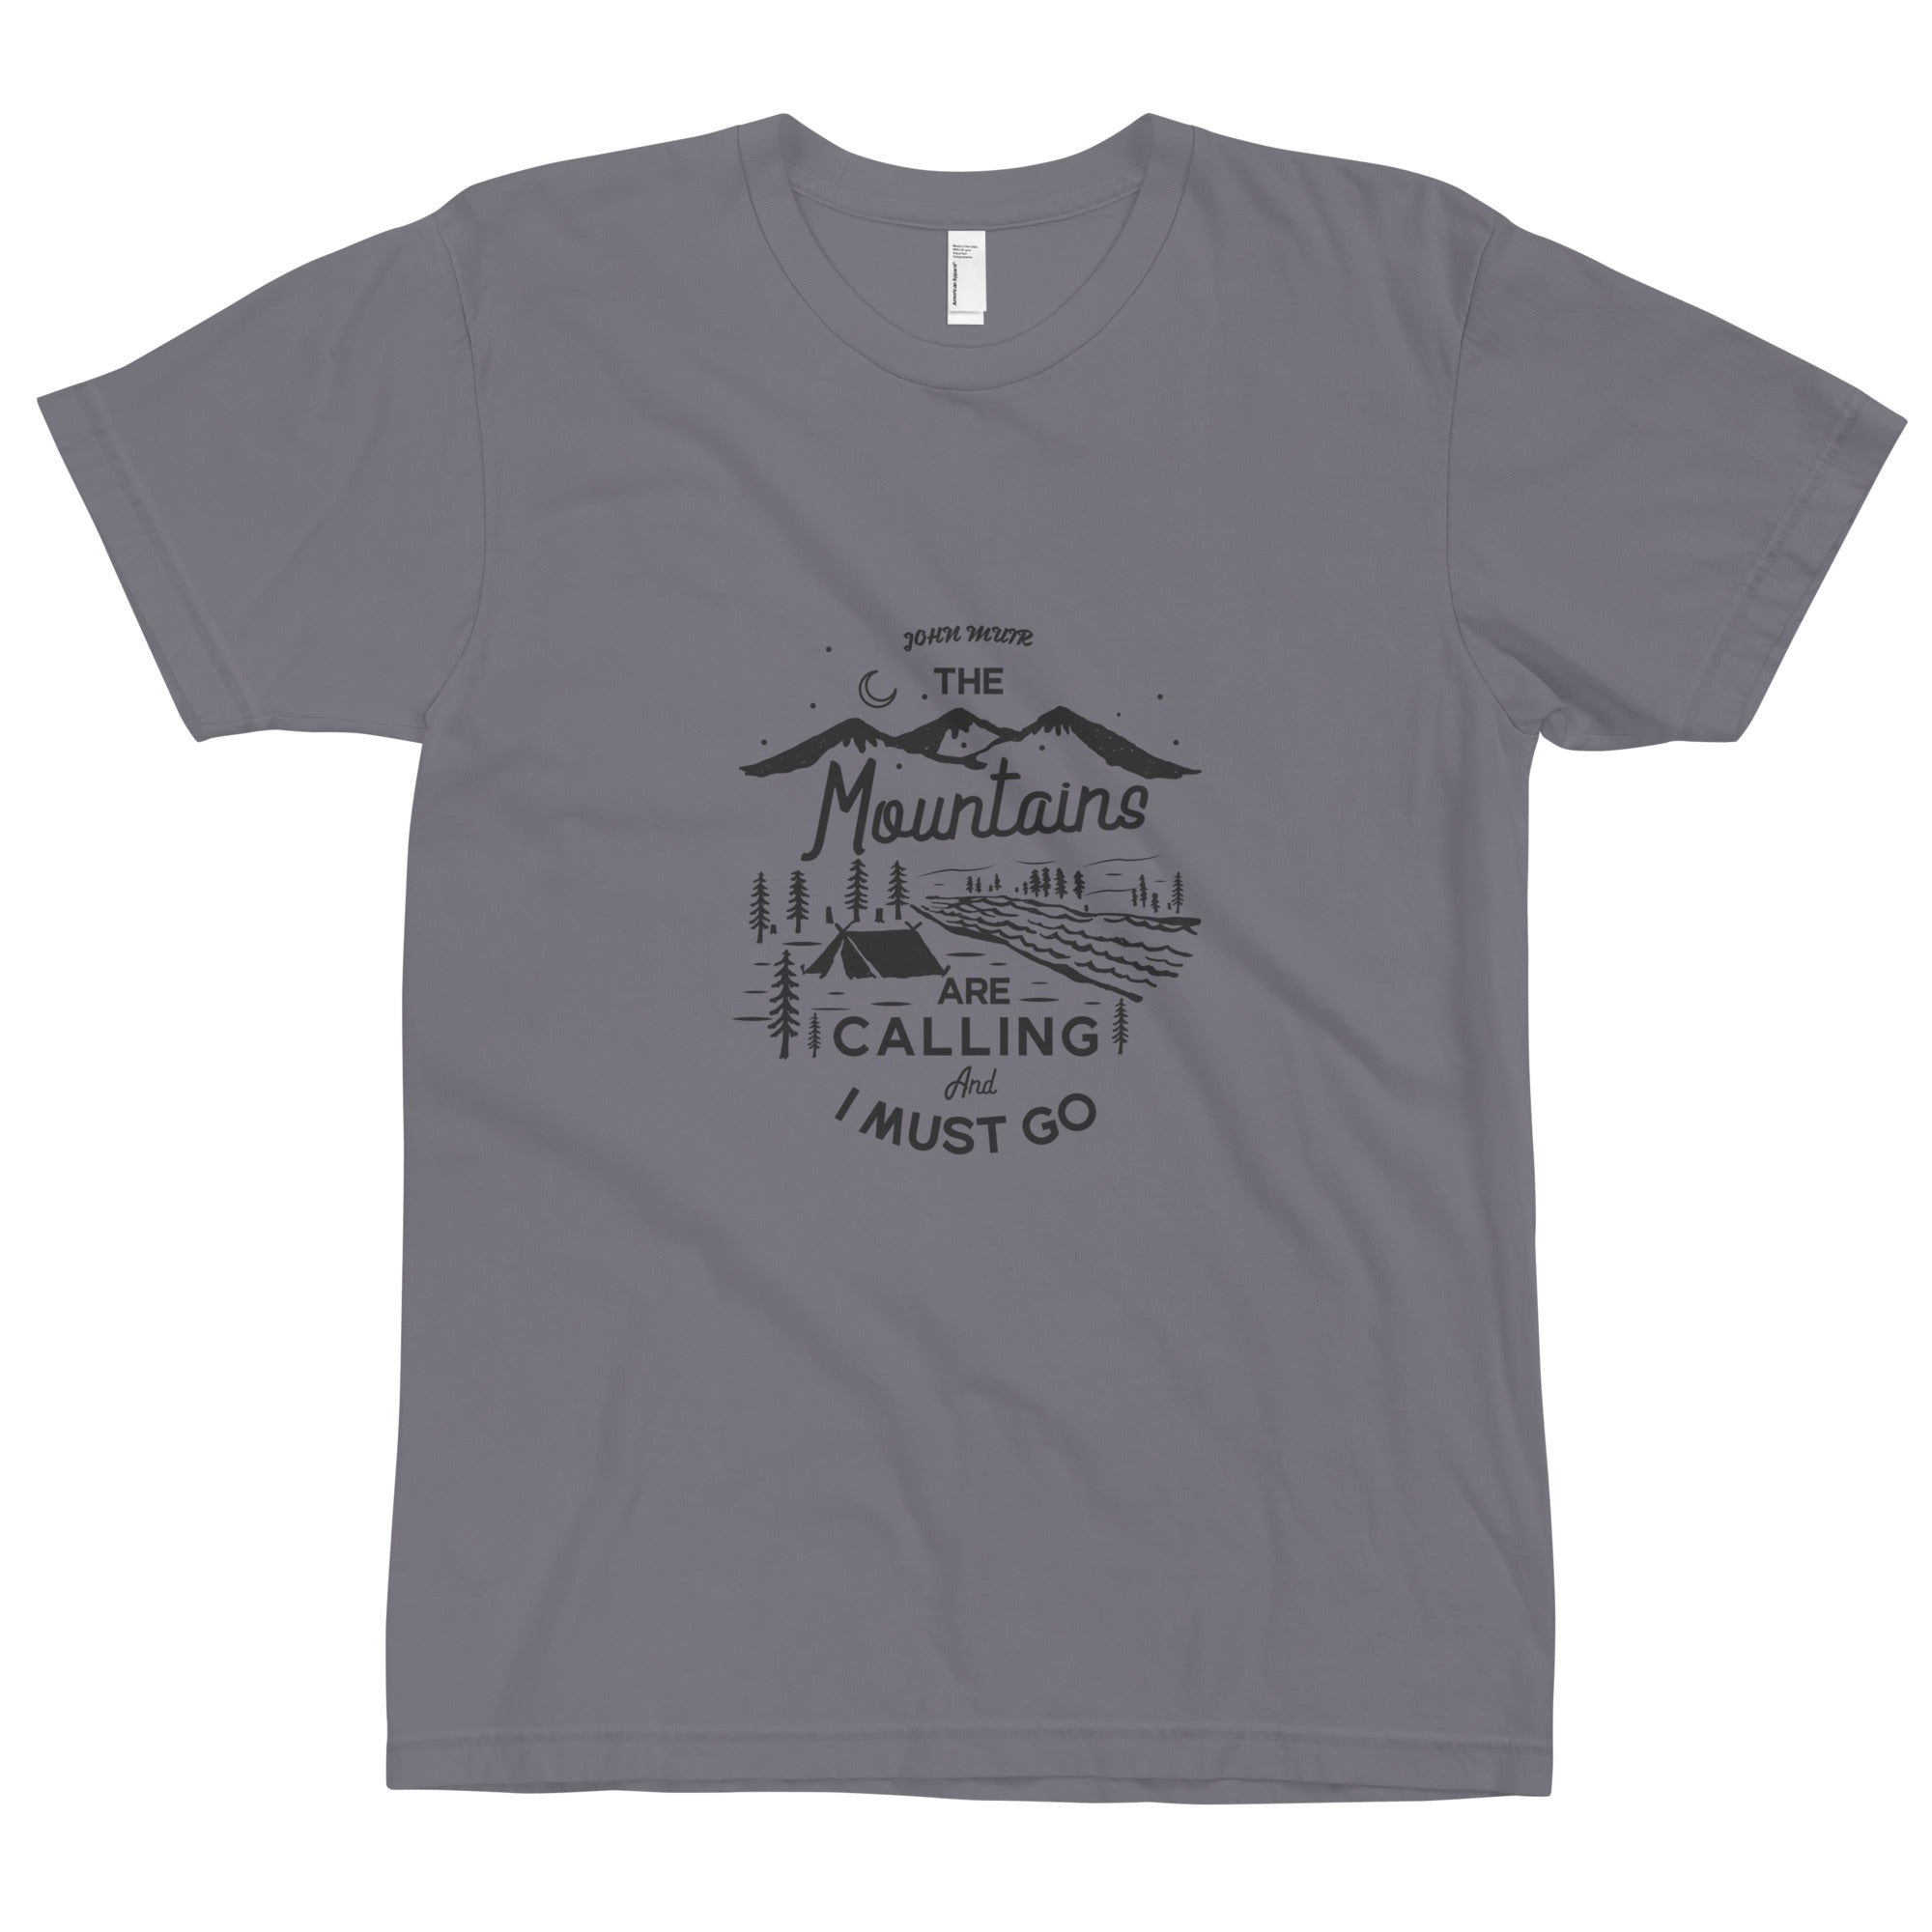 The Mountains are Calling Unisex T-Shirt